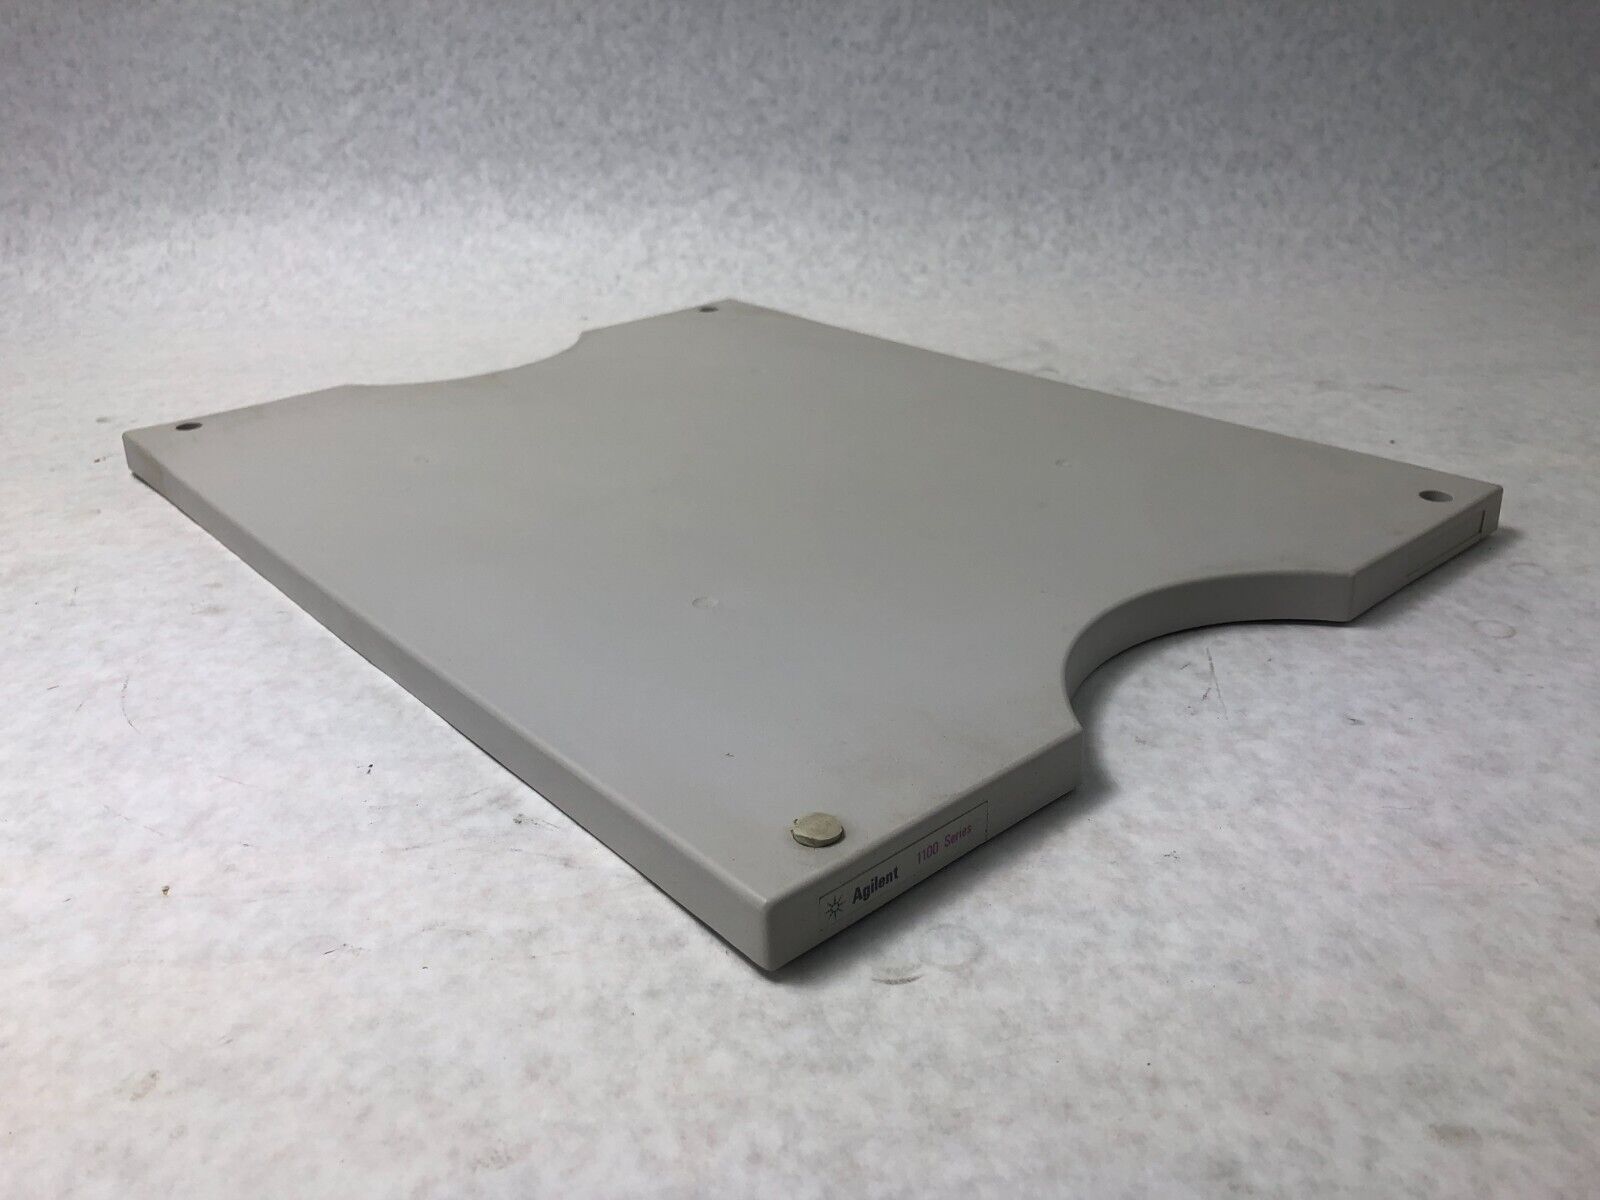 Agilent 1100 Series Degasser Solvent Tray Top Cover Lid Replacement 5042-6457